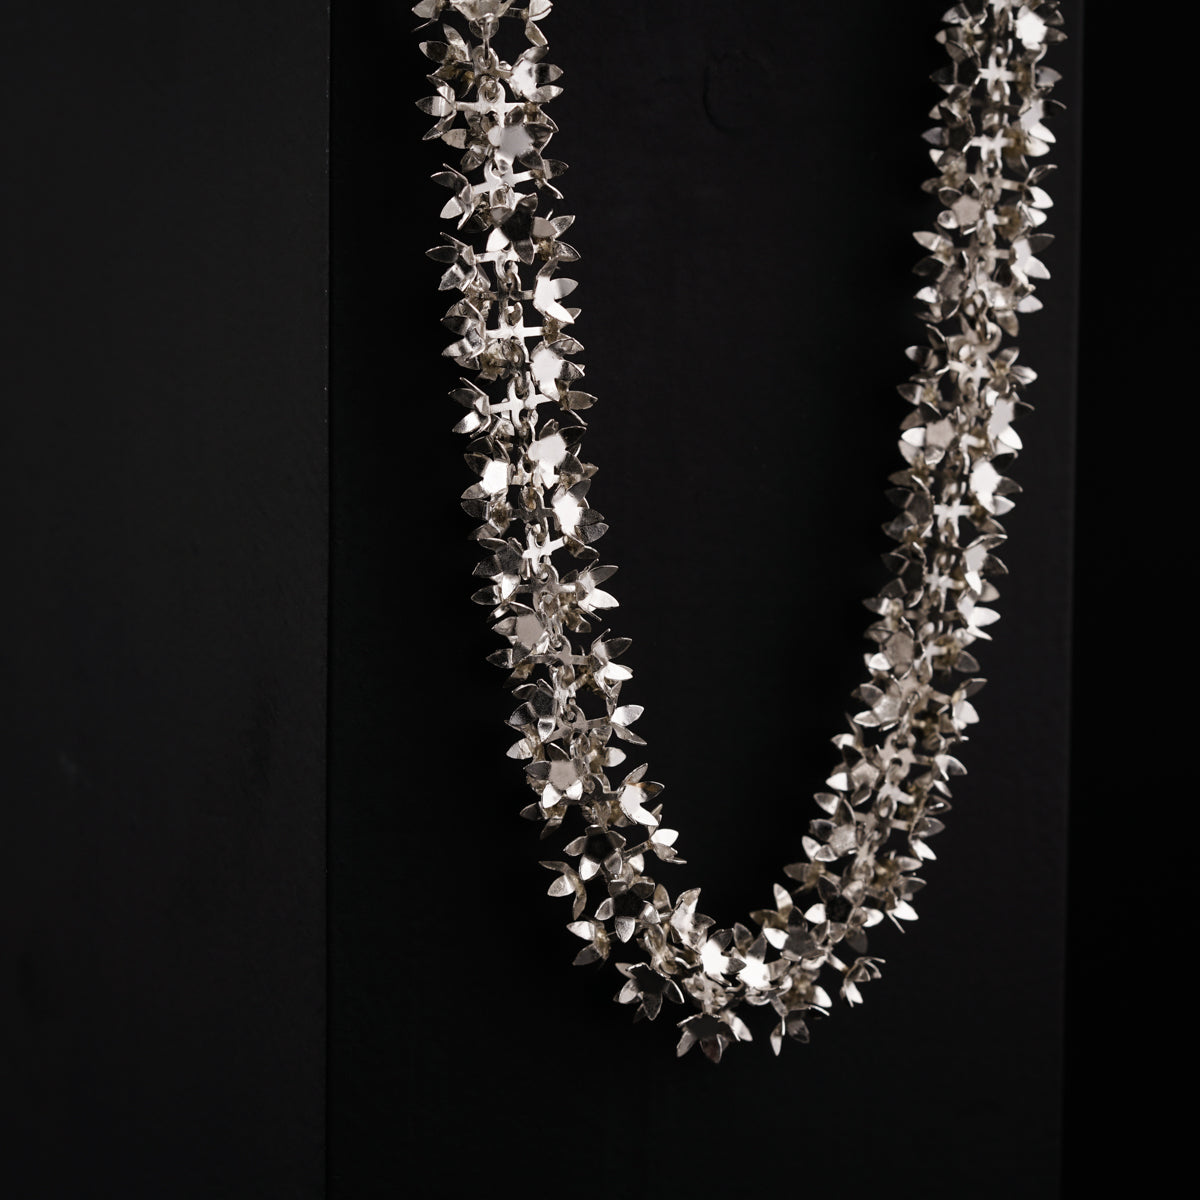 a necklace with silver flowers on a black background